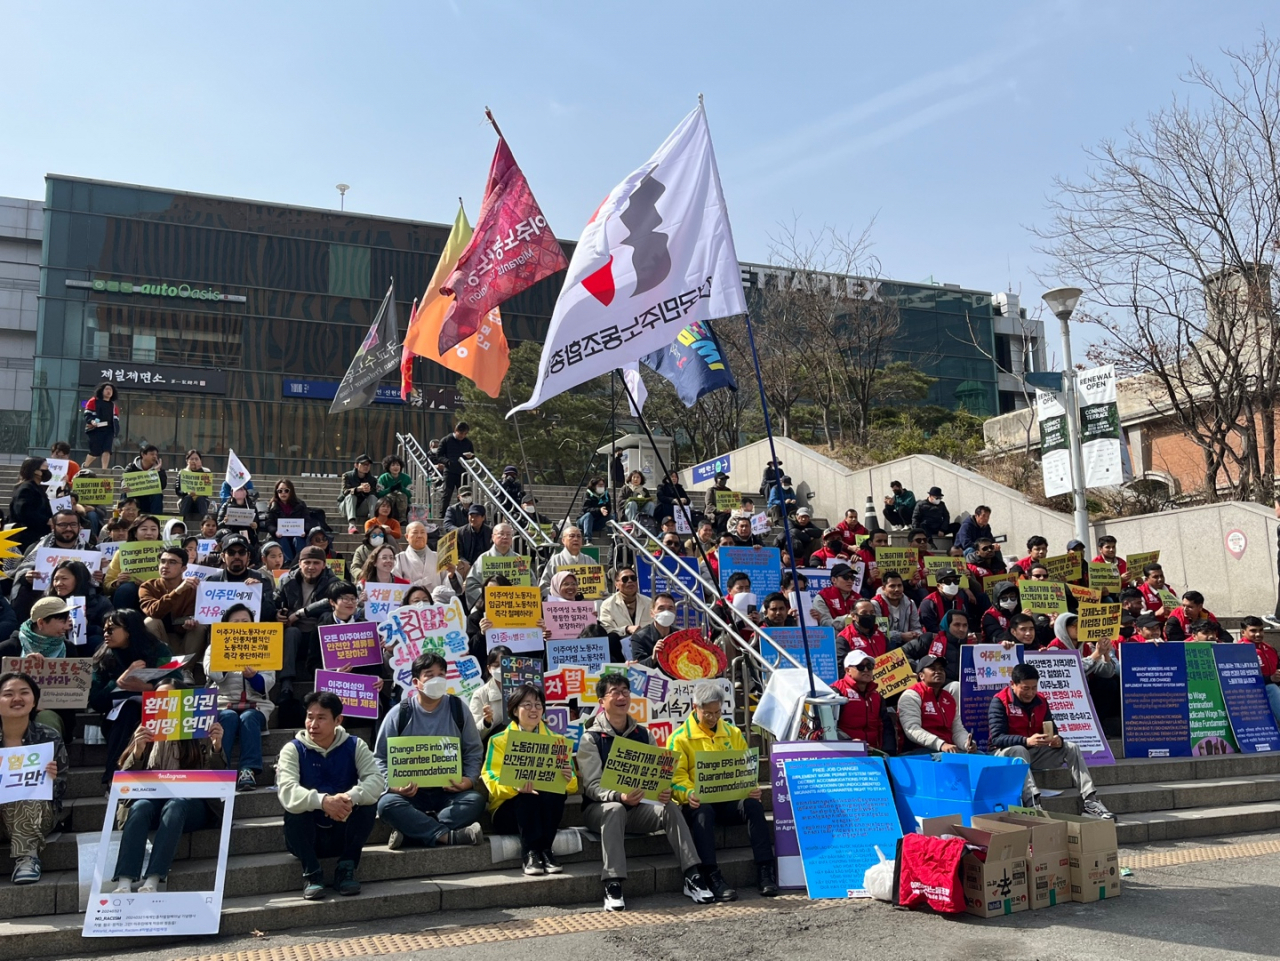 Foreign workers hold a protest outside Seoul Station, in central Seoul, Sunday, demanding better treatment and legal protection against discrimination for non-Korean laborers. (Lee Jaeeun/ The Korea Herald)